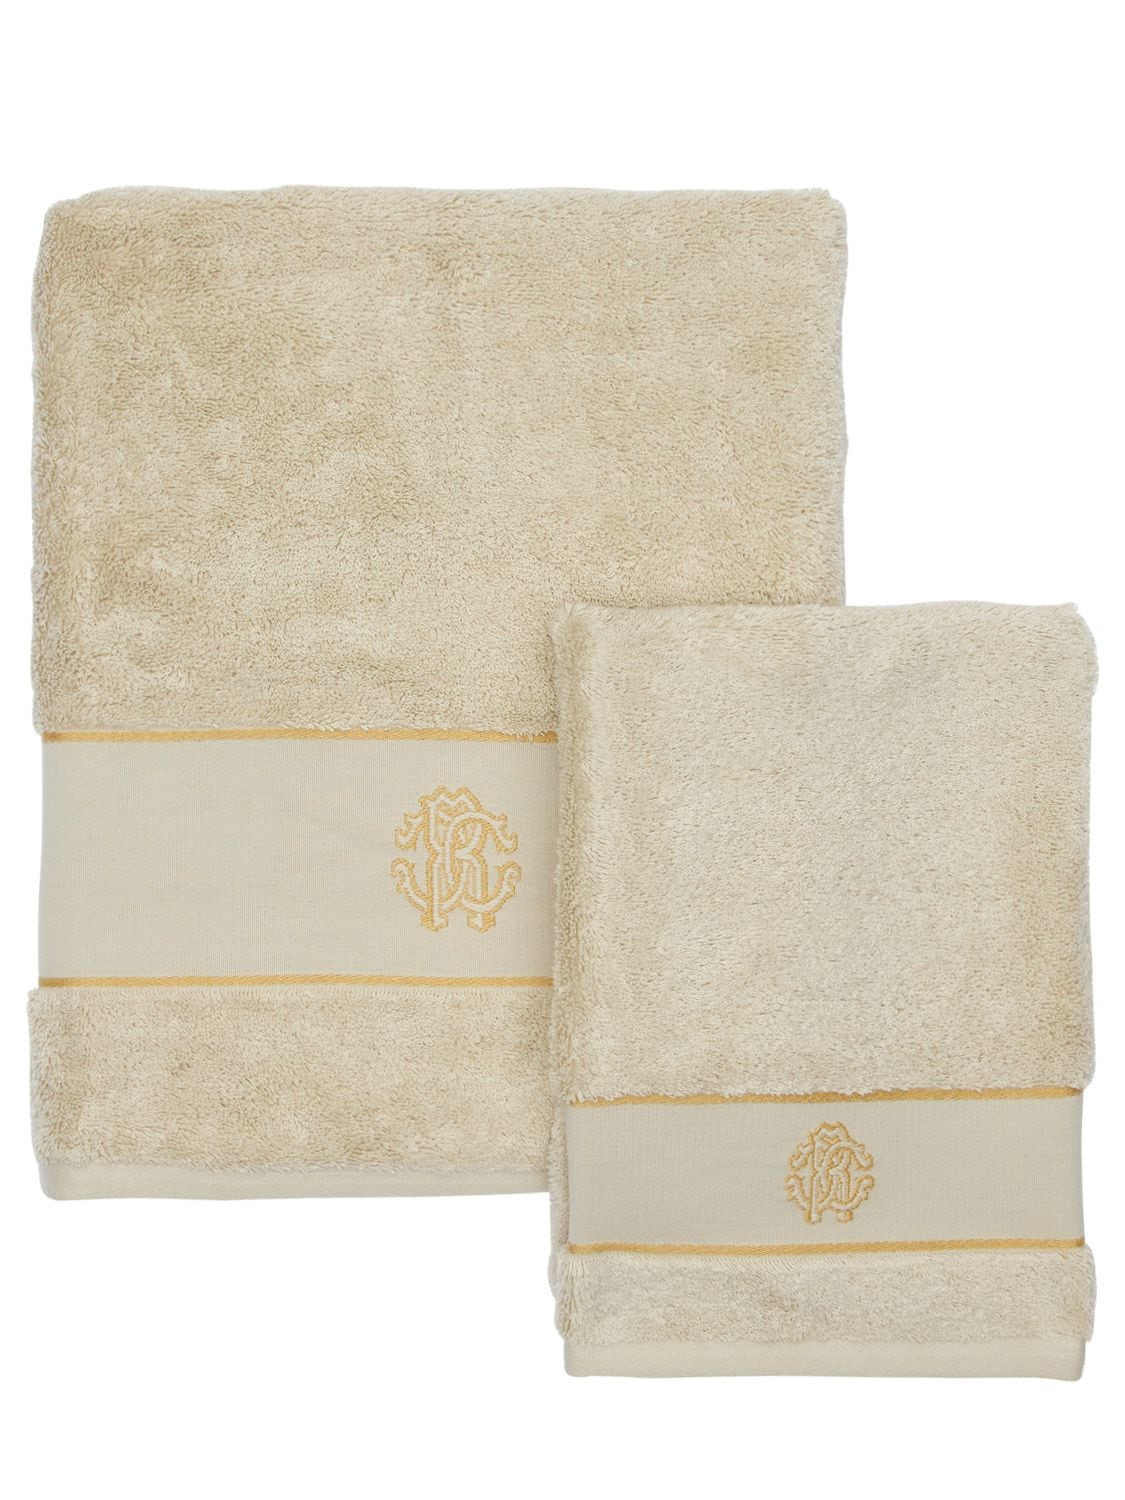 Image of Set Of 2 New Gold Towels